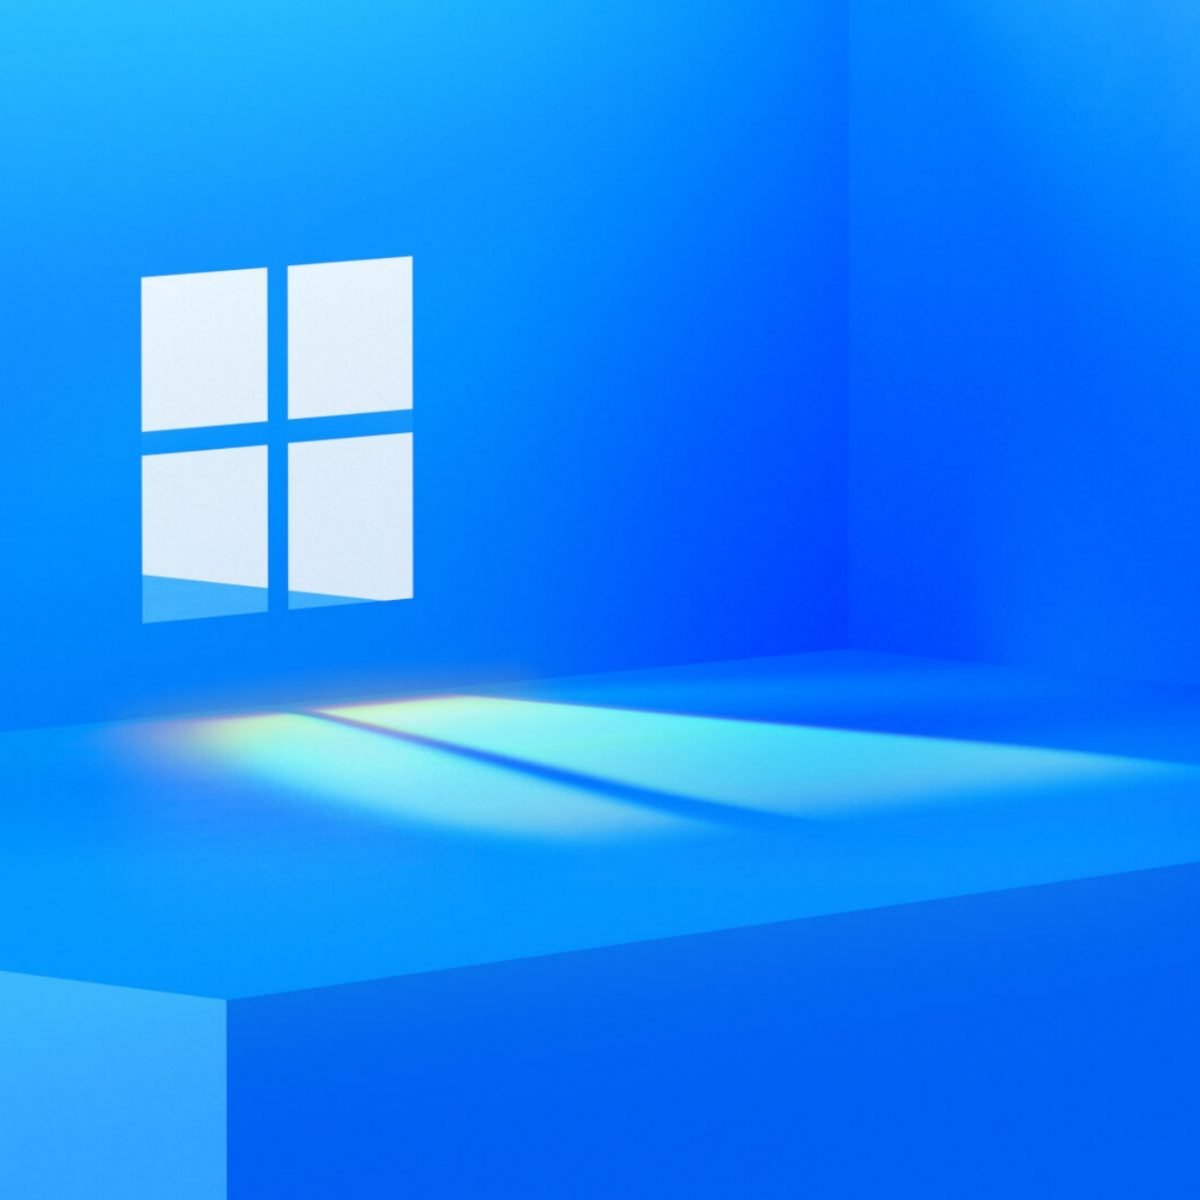 How To Download The Latest Windows 11 Wallpaper